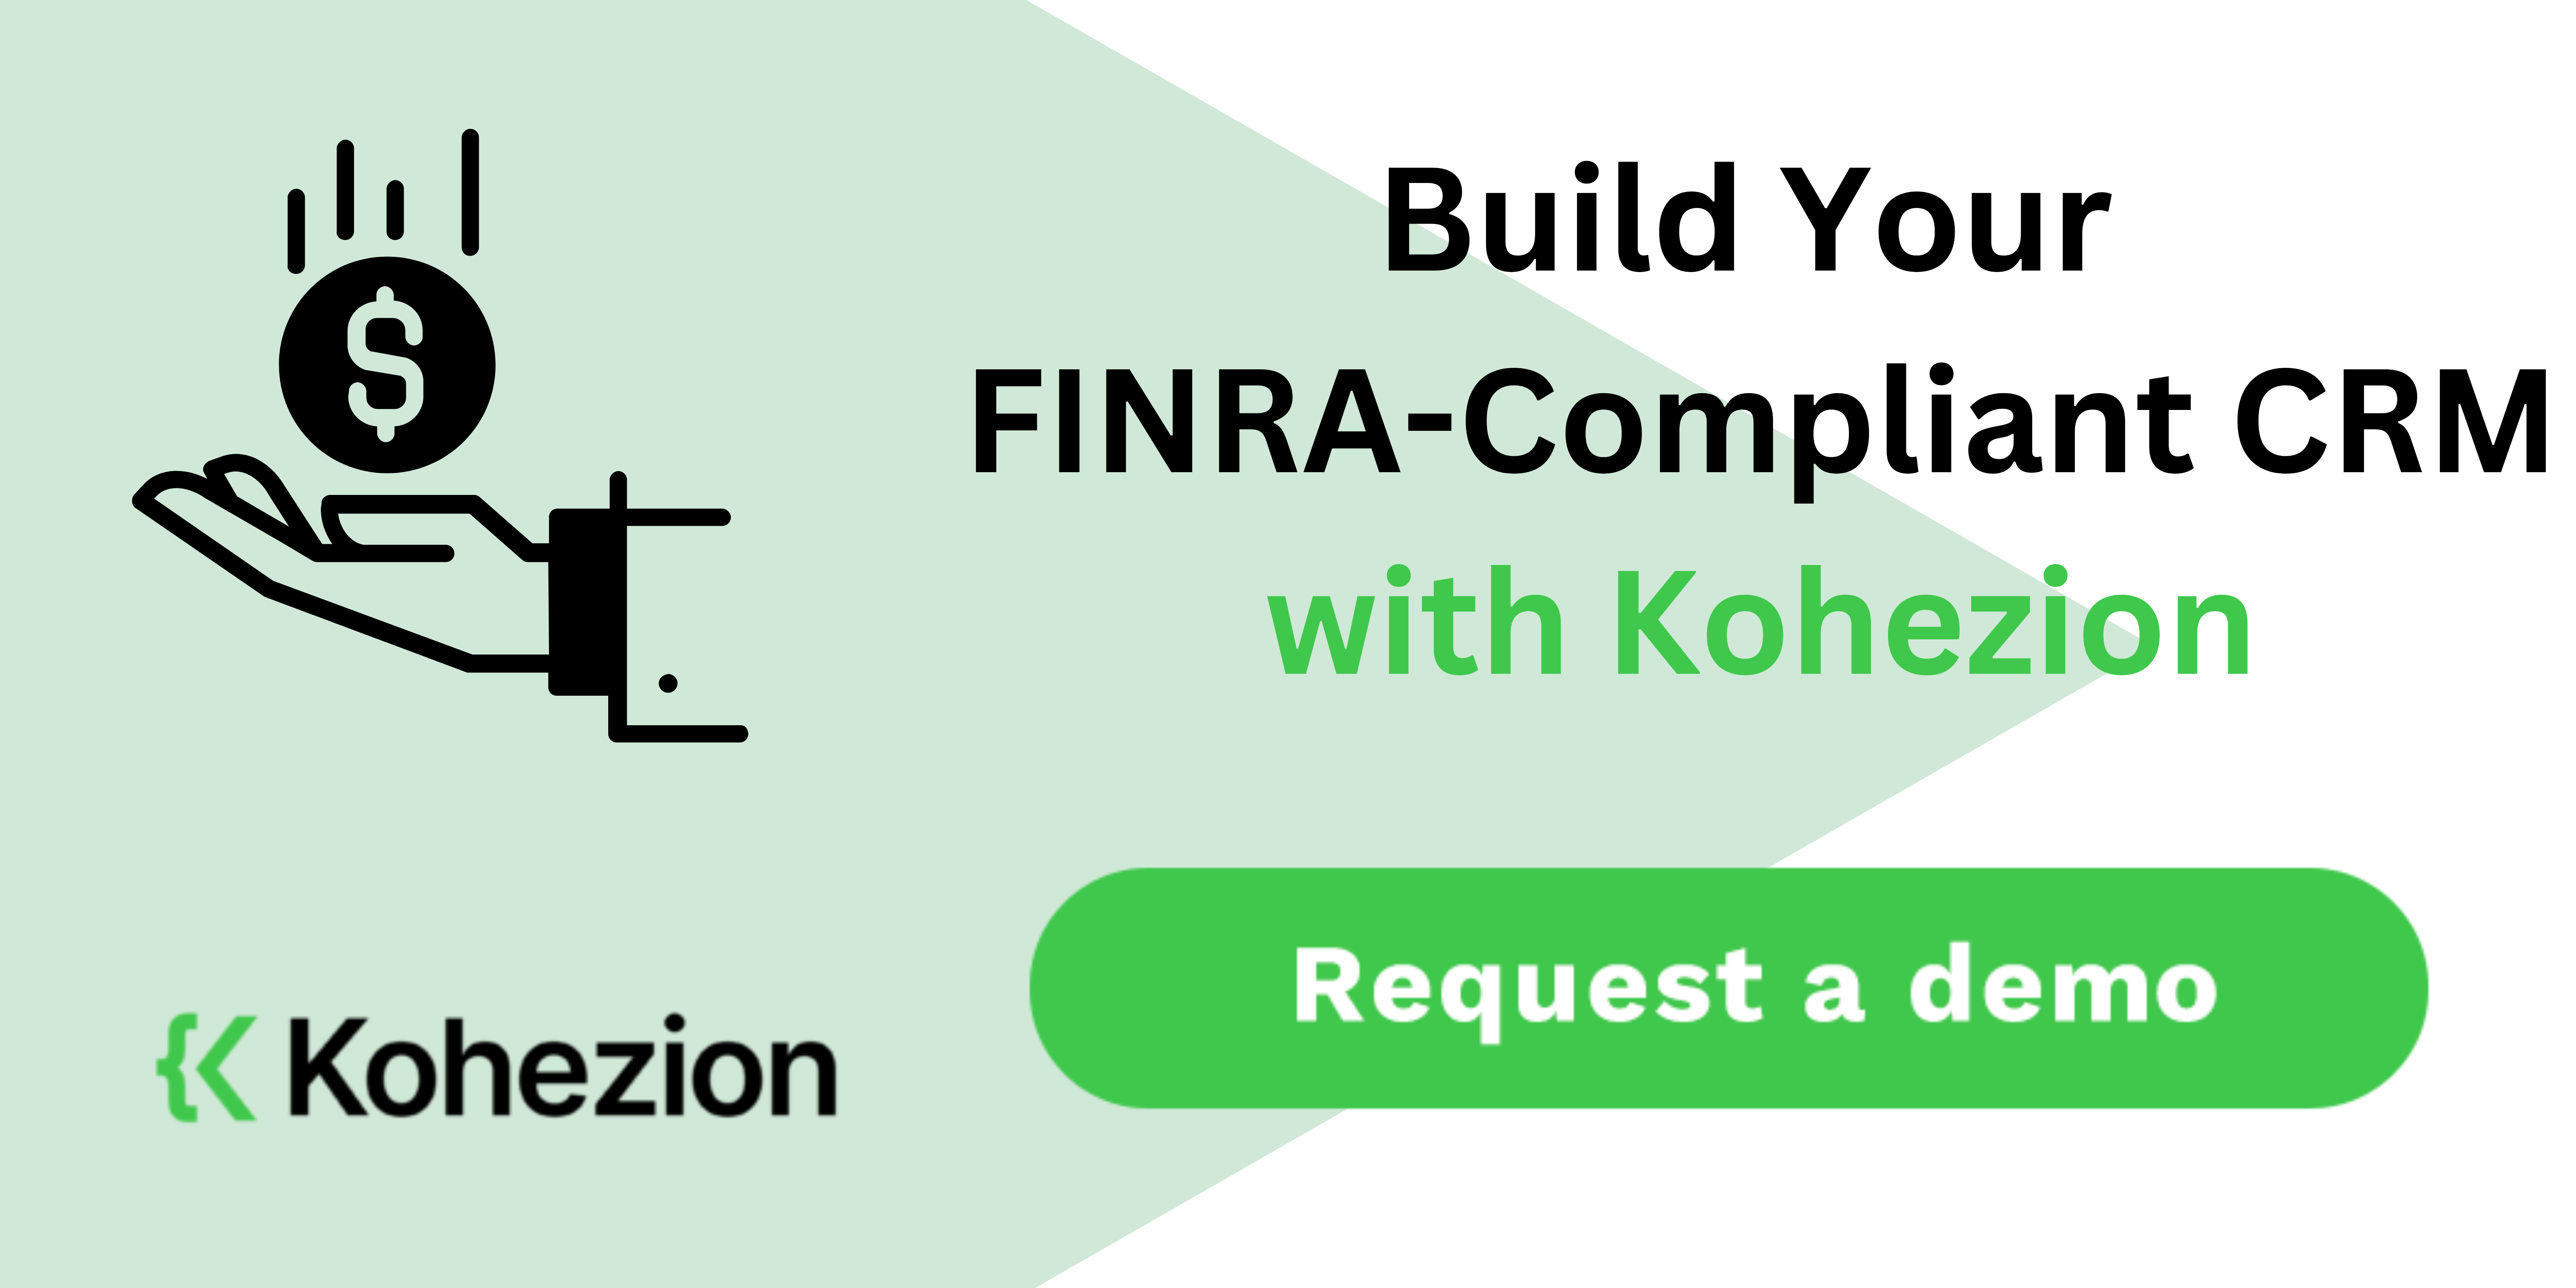 build your finra compliant crm with kohezion